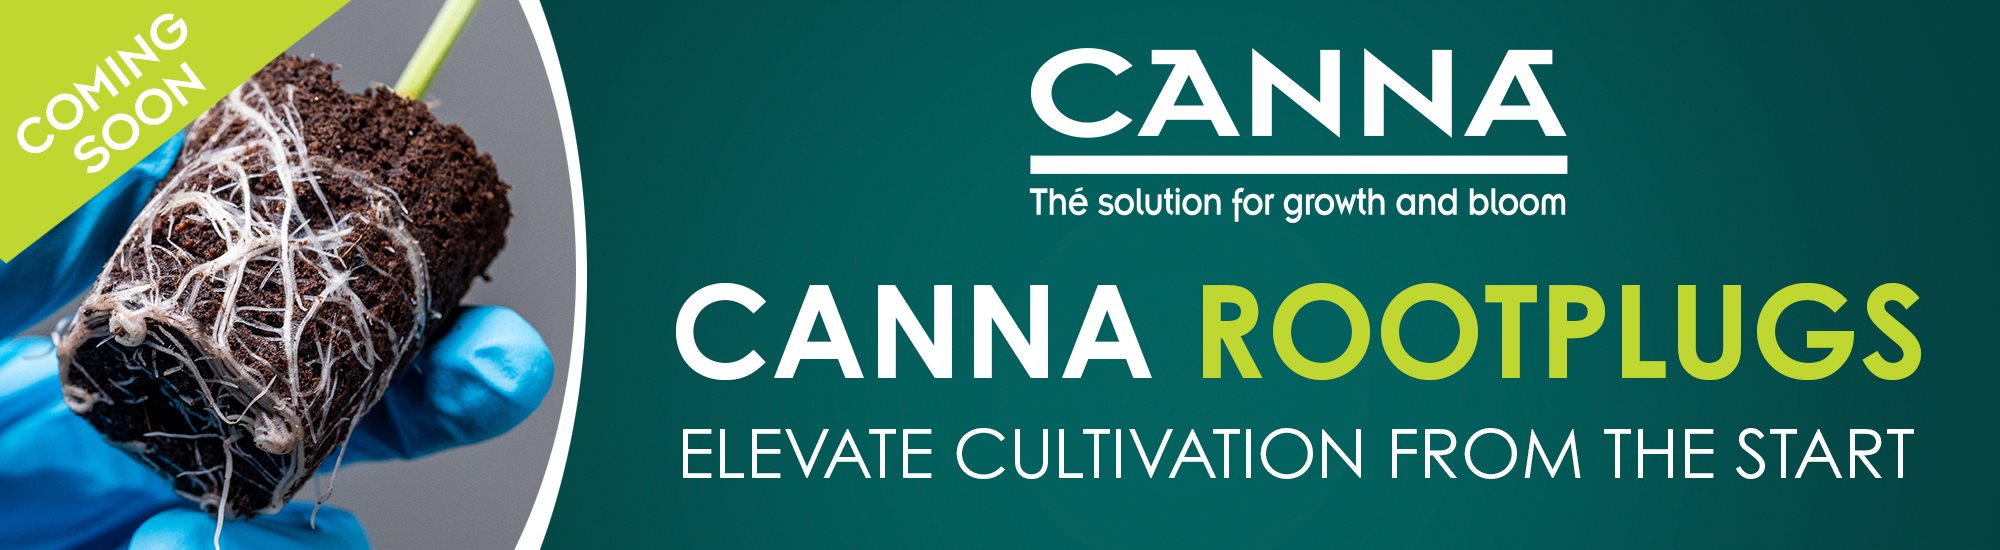 CANNA ROOTPLUGS WEB BANNER - COMING SOON - BioForal West